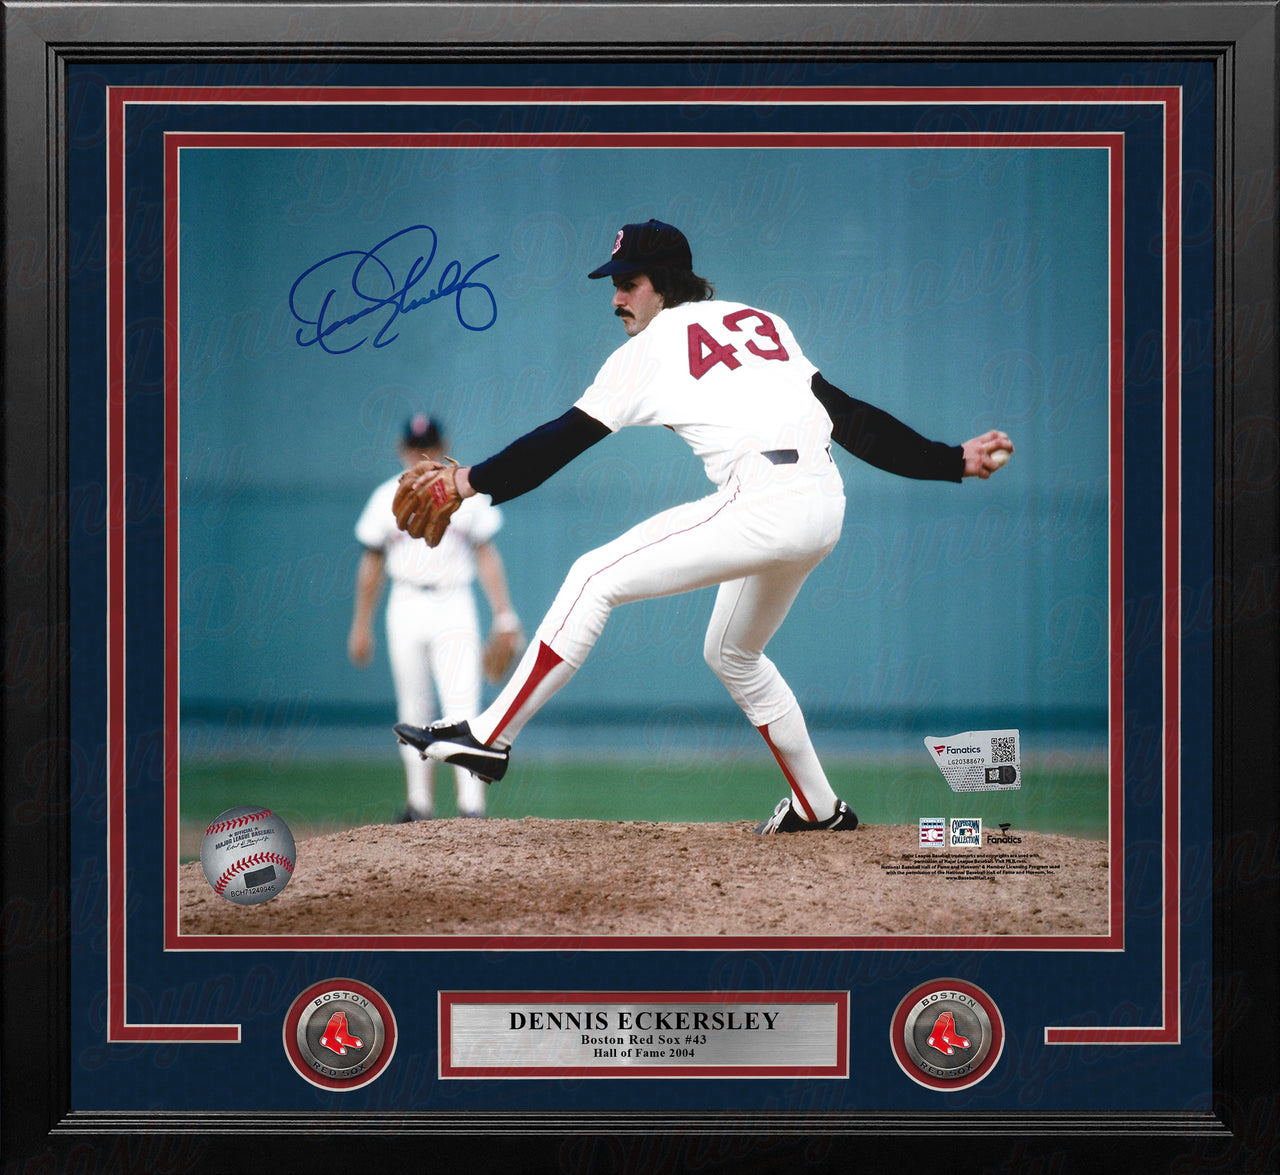 Dennis Eckersley in Action Boston Red Sox Autographed 11" x 14" Framed Baseball Photo - Dynasty Sports & Framing 